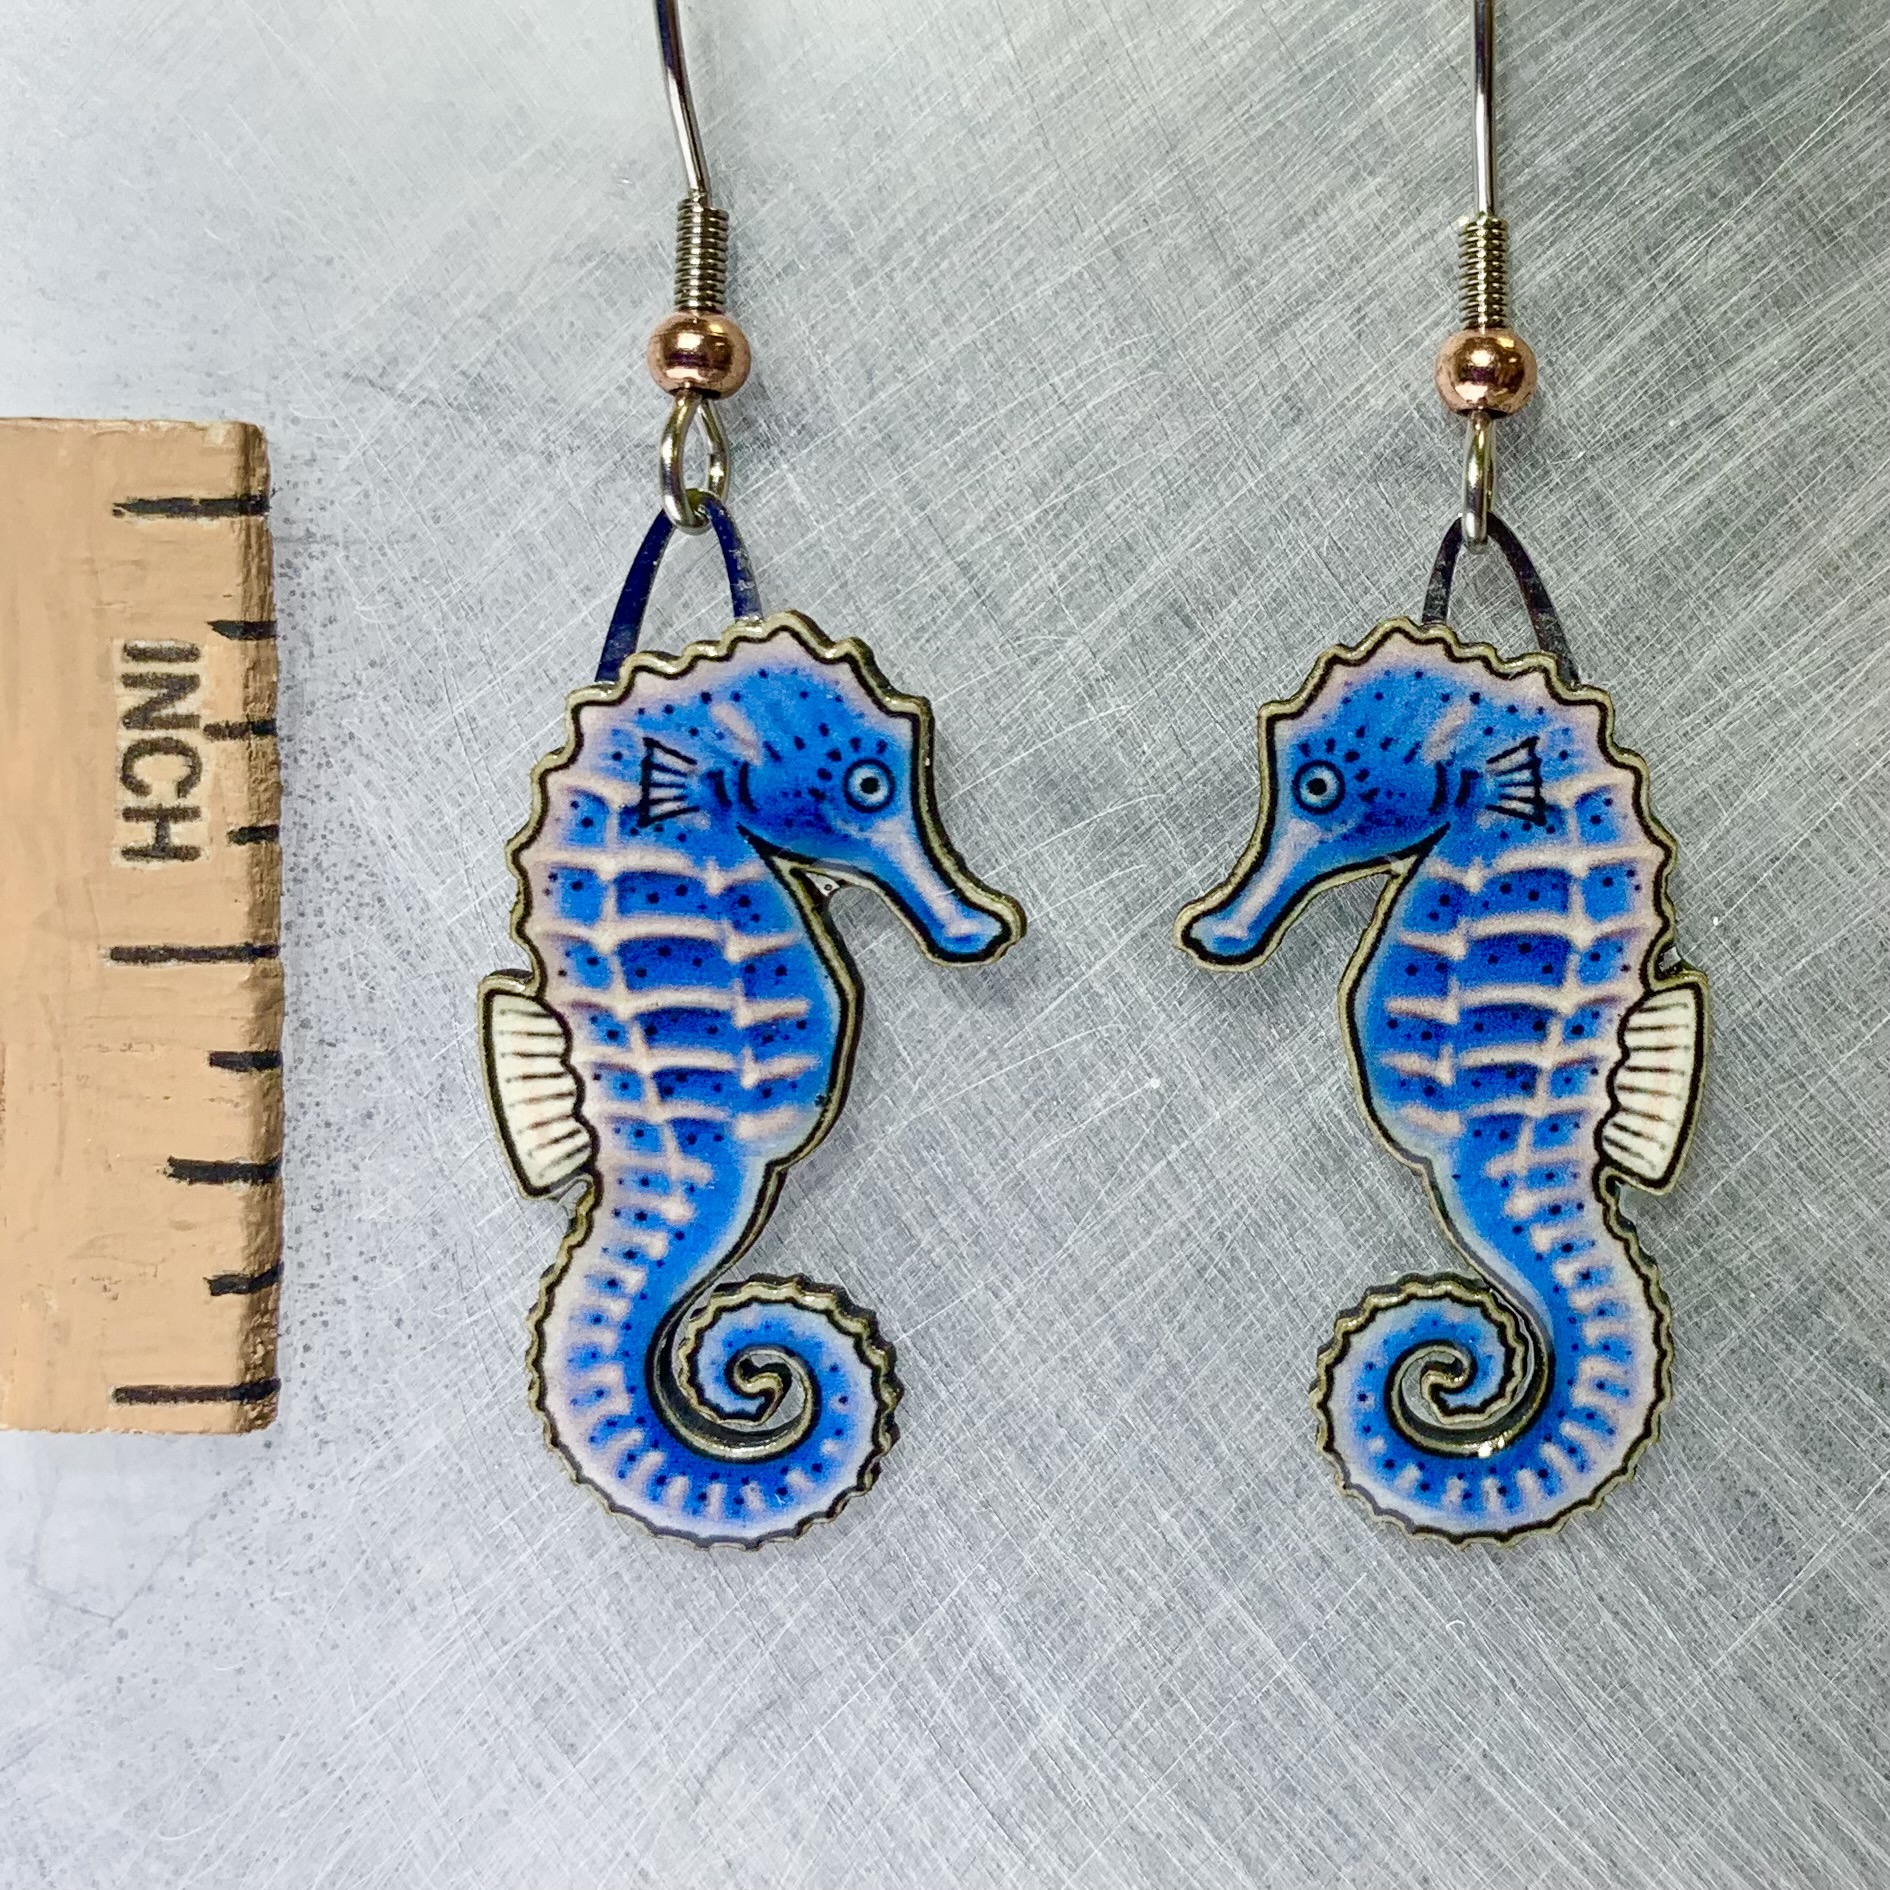 Picture shown is of 1 inch tall pair of earrings of the marine animal the Blue Seahorse.